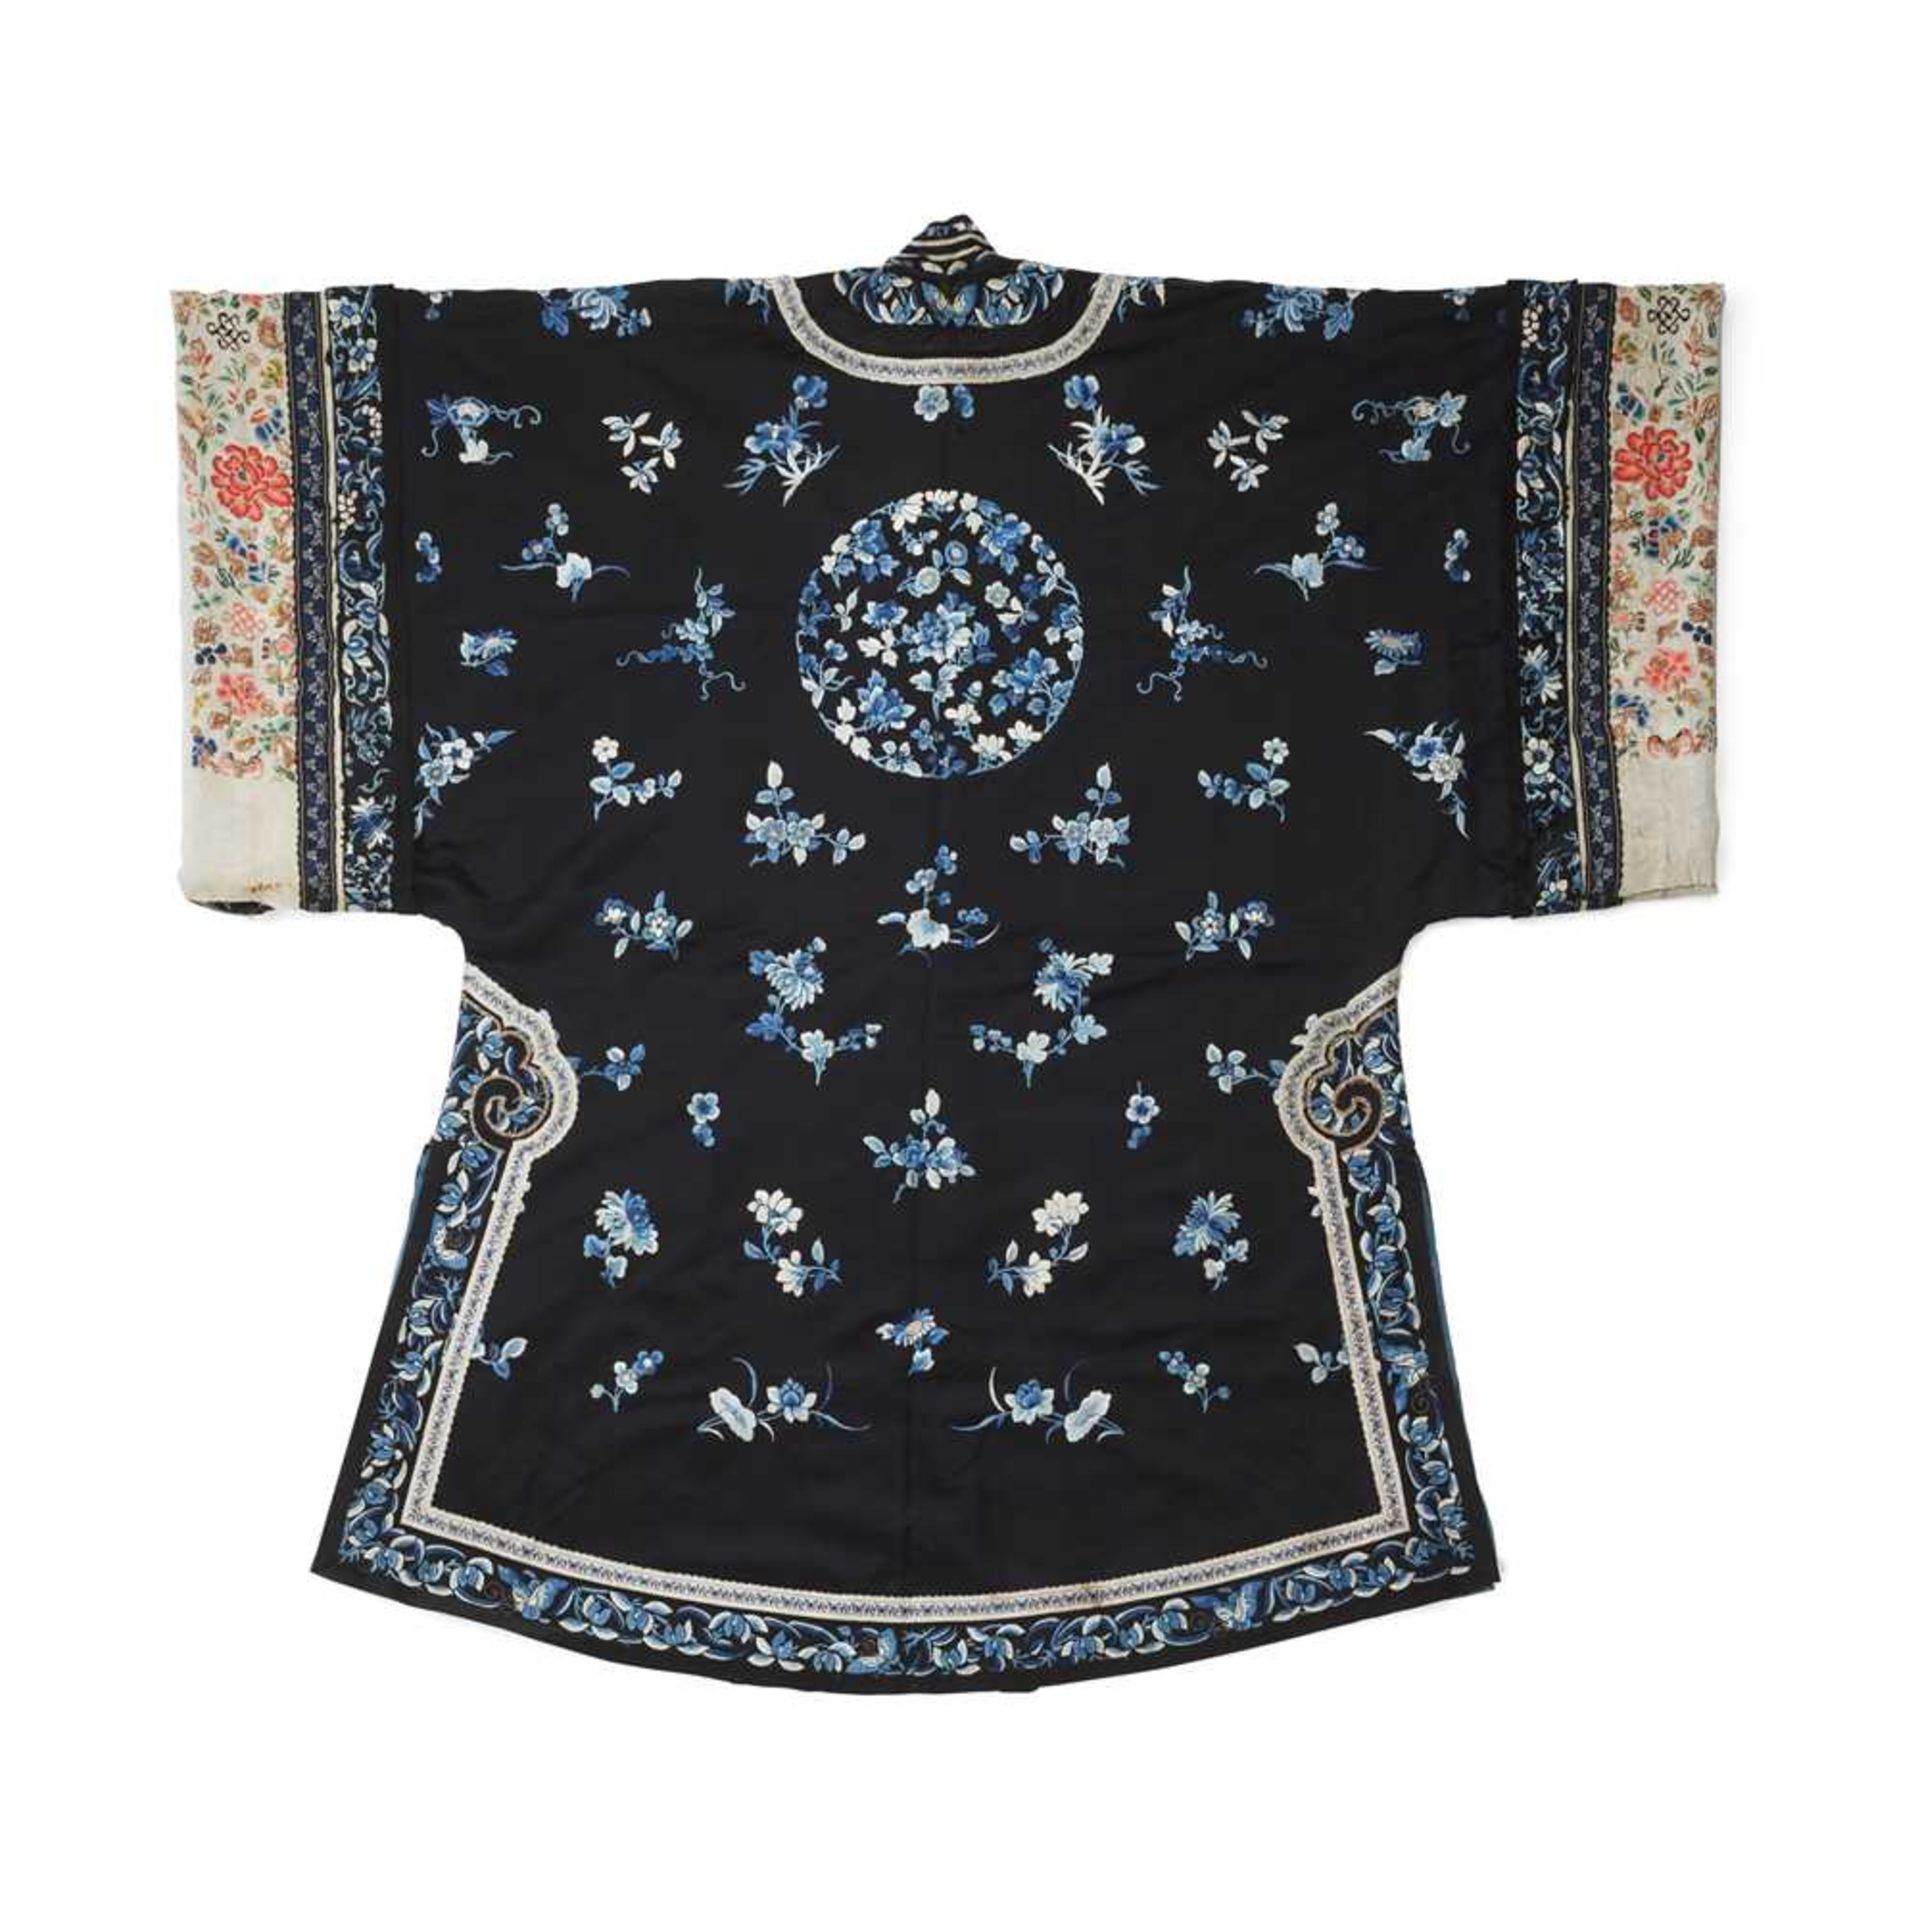 BLACK-GROUND SILK EMBROIDERED LADY'S OVERCOAT LATE QING DYNASTY-REPUBLIC PERIOD, 19TH-20TH CENTURY - Image 2 of 2